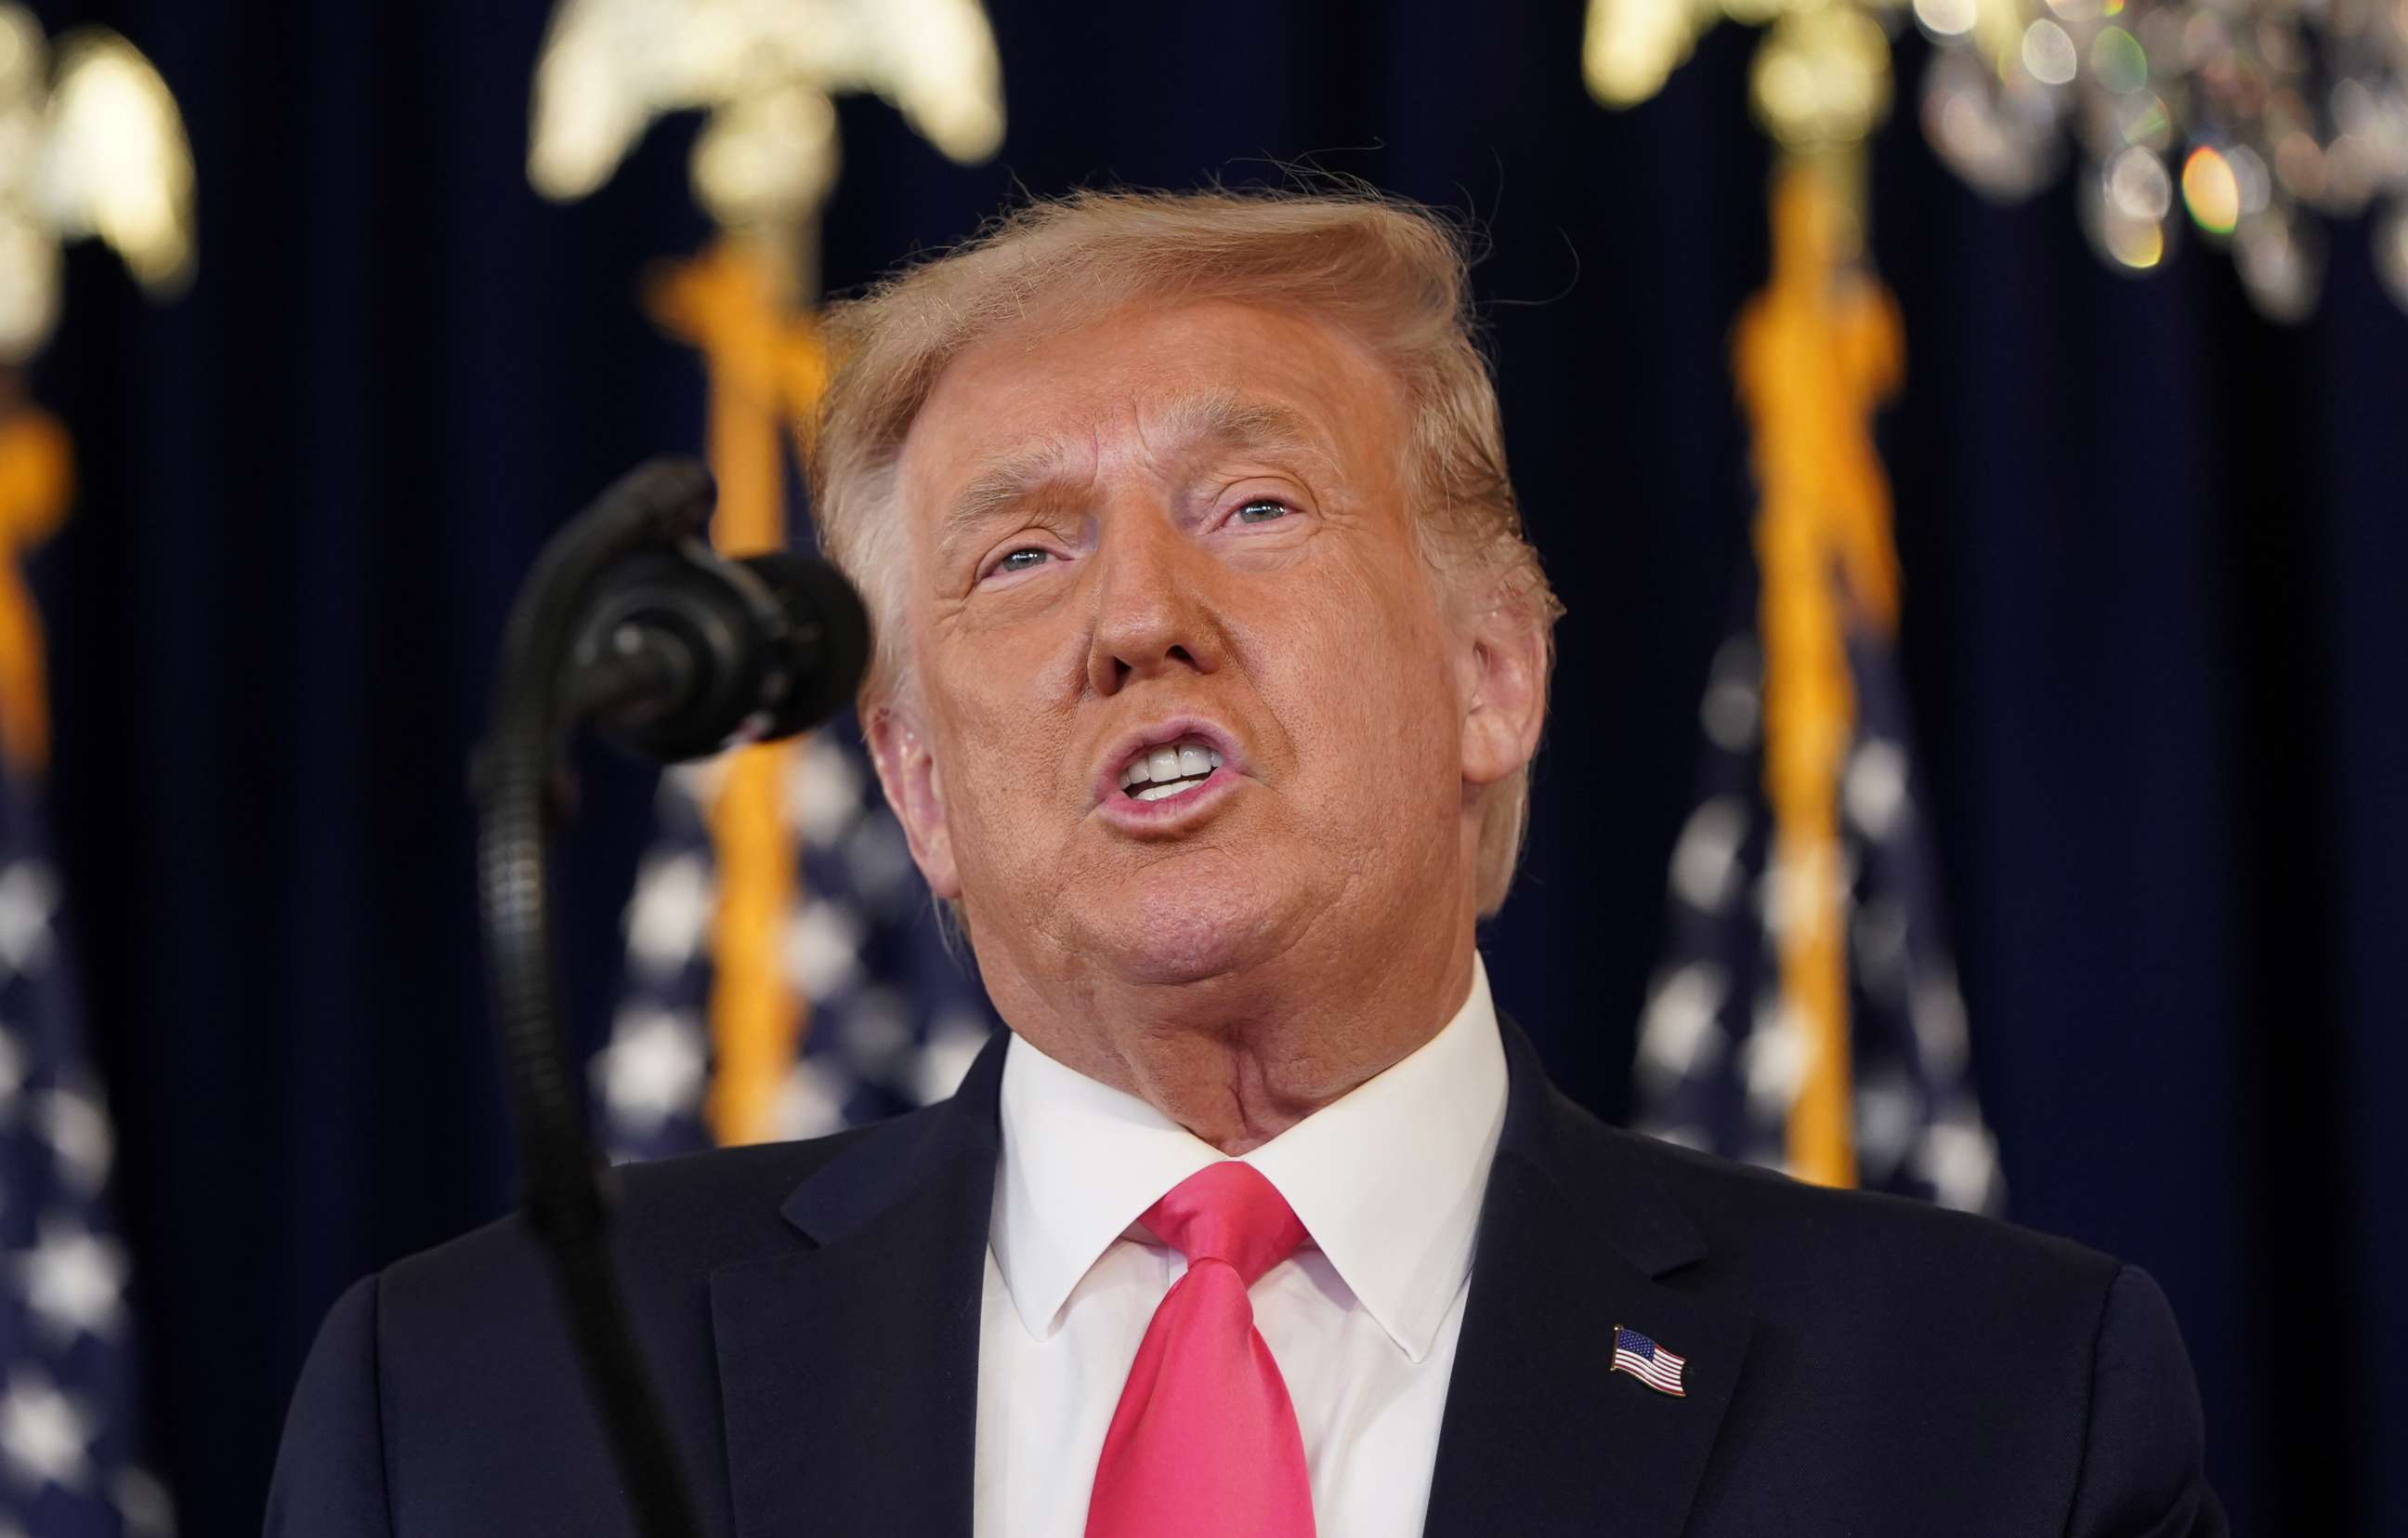 PHOTO: President Donald Trump speaks during a news conference amid the spread of the novel coronavirus, at his golf resort in Bedminster, N.J., Aug. 8, 2020.